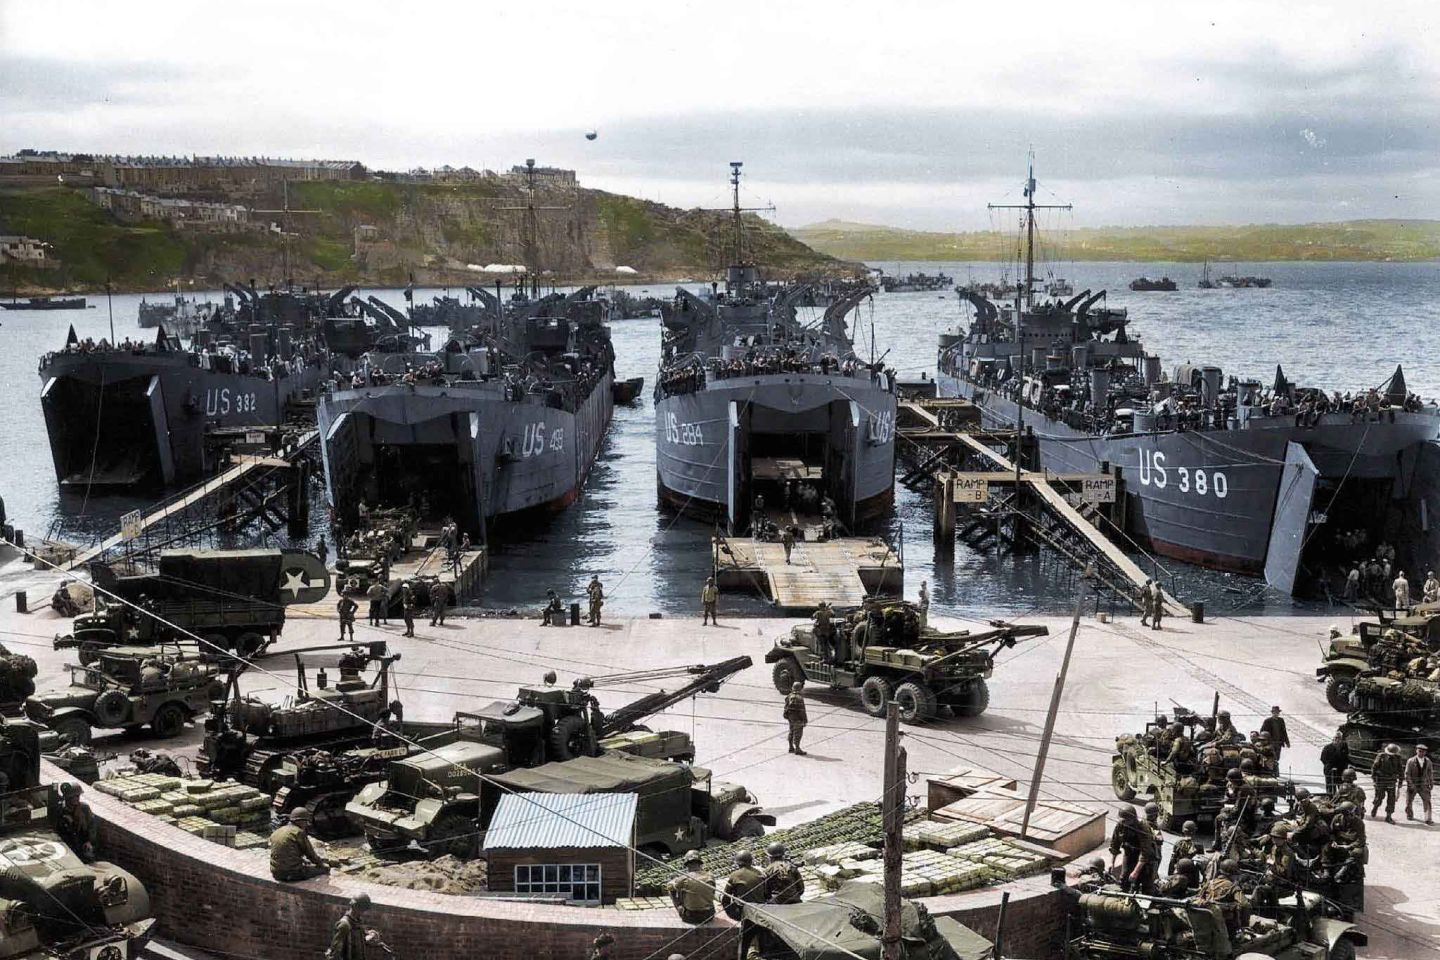 From right to left; USS LST-380, USS LST-284, USS LST-499, and USS LST-382 at Brixham Harbour, England, 1 June 1944,